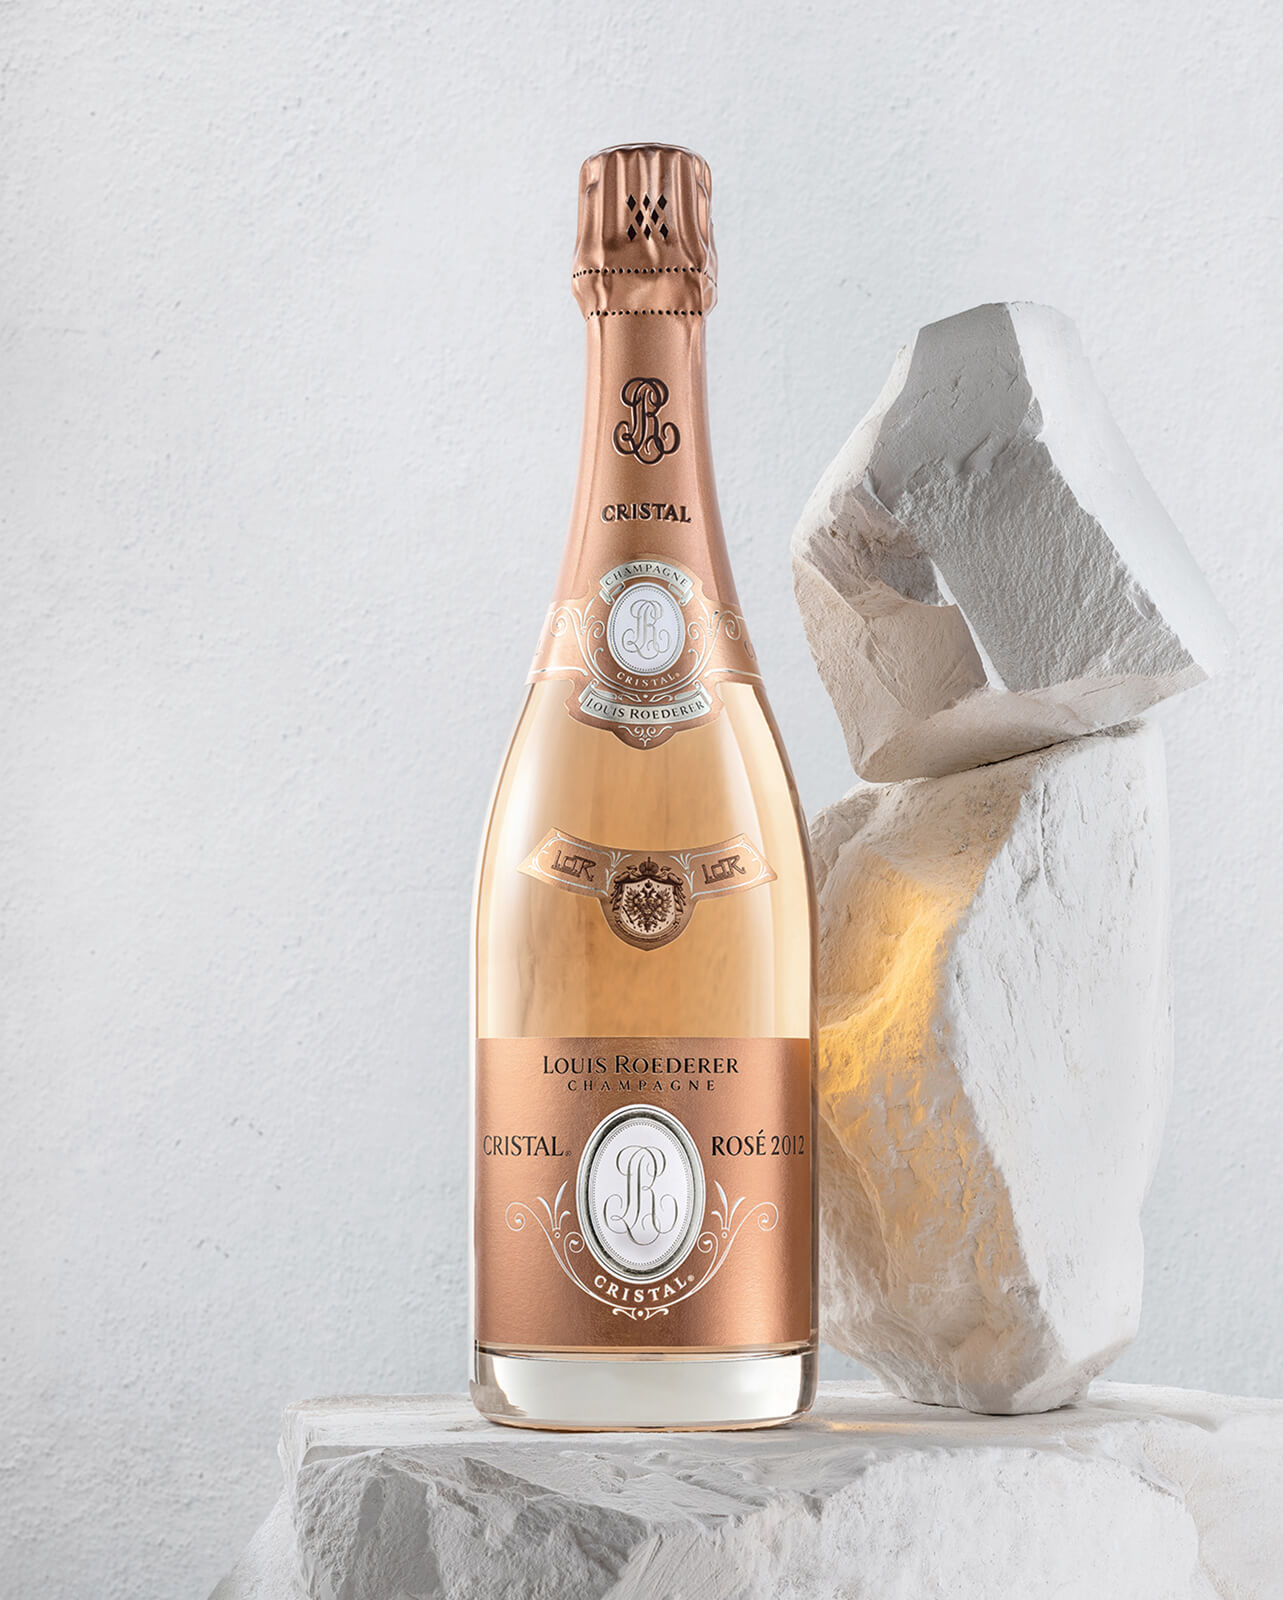 Cristal - Cristal Champagne Roederer Gets & As Quill Pad Rosé Louis As And 2012: Good 2013